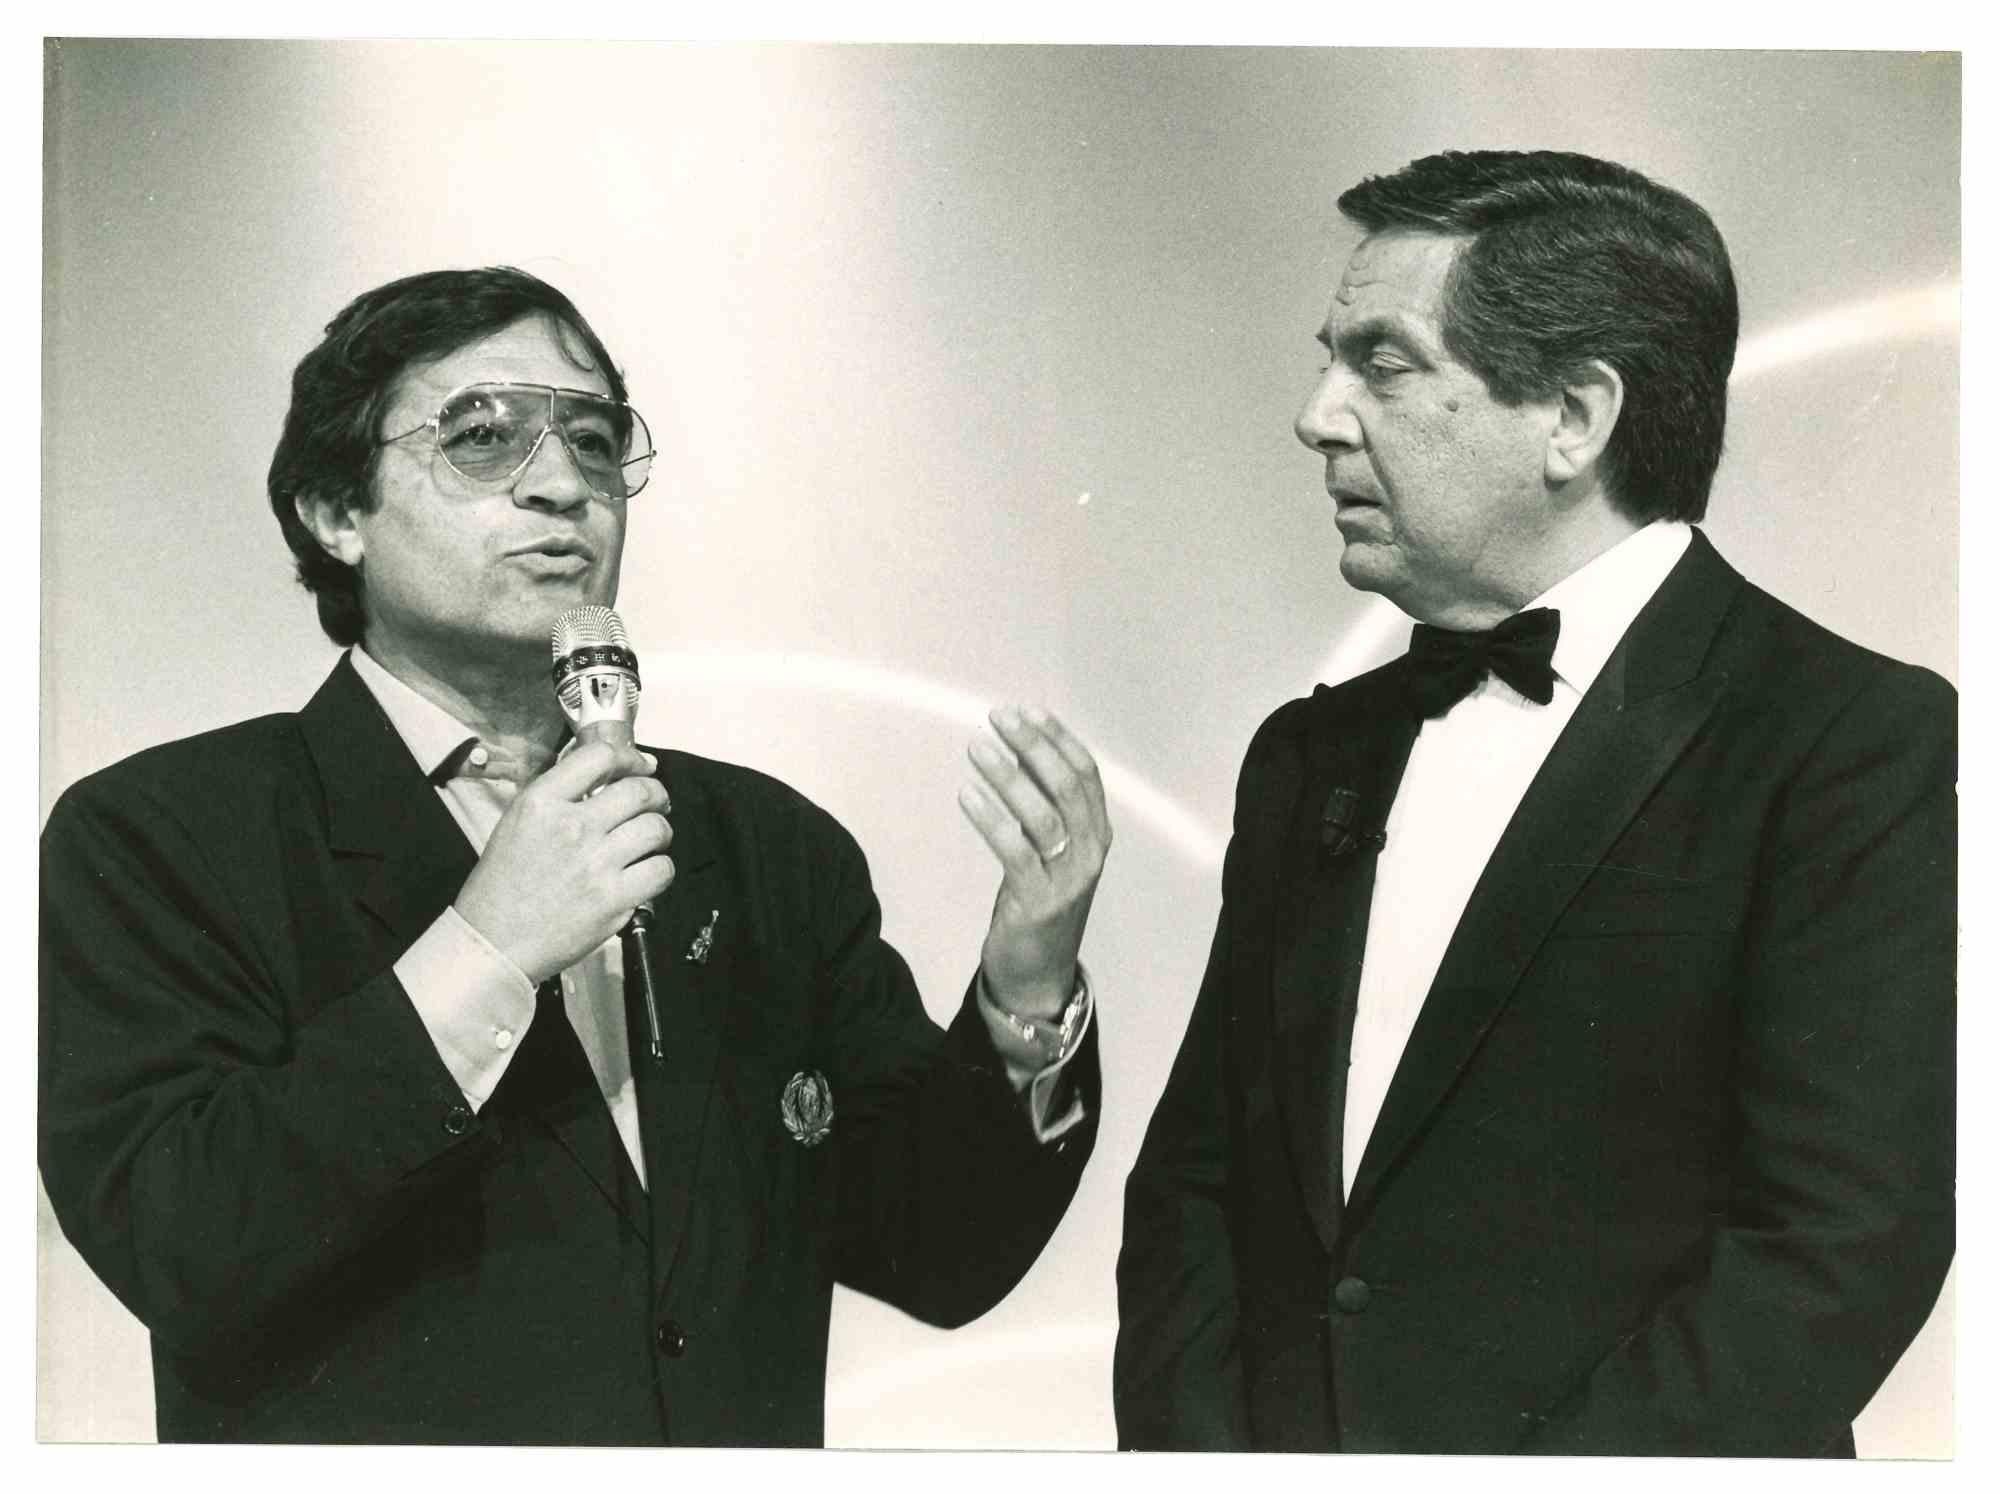 Unknown Figurative Photograph - Fred Bongusto and Corrado - Vintage Photograph - 1970s